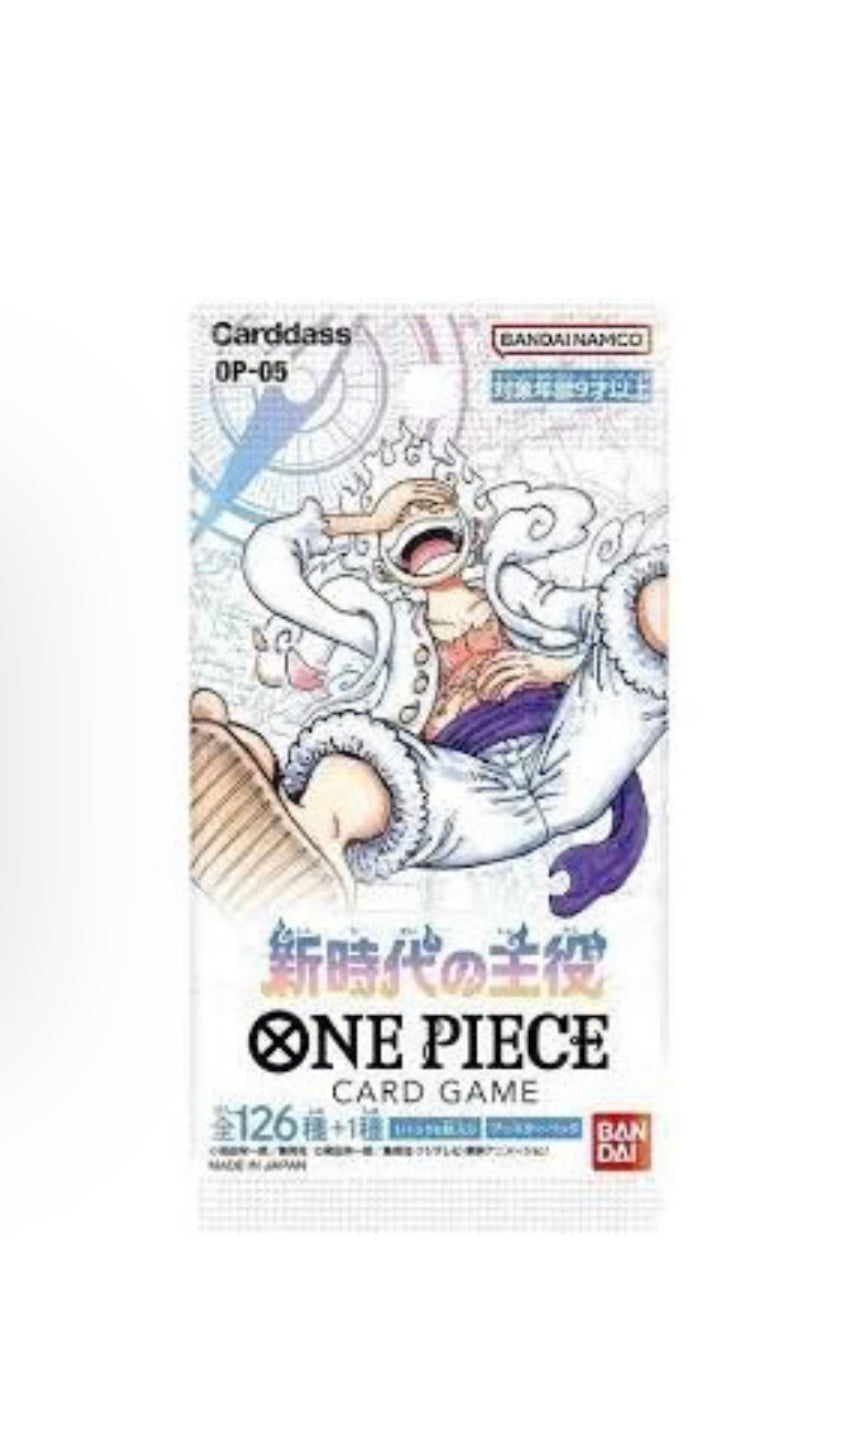 One Piece Trading Card Game Op-05 Awakening of the New Era Japanese Booster Pack